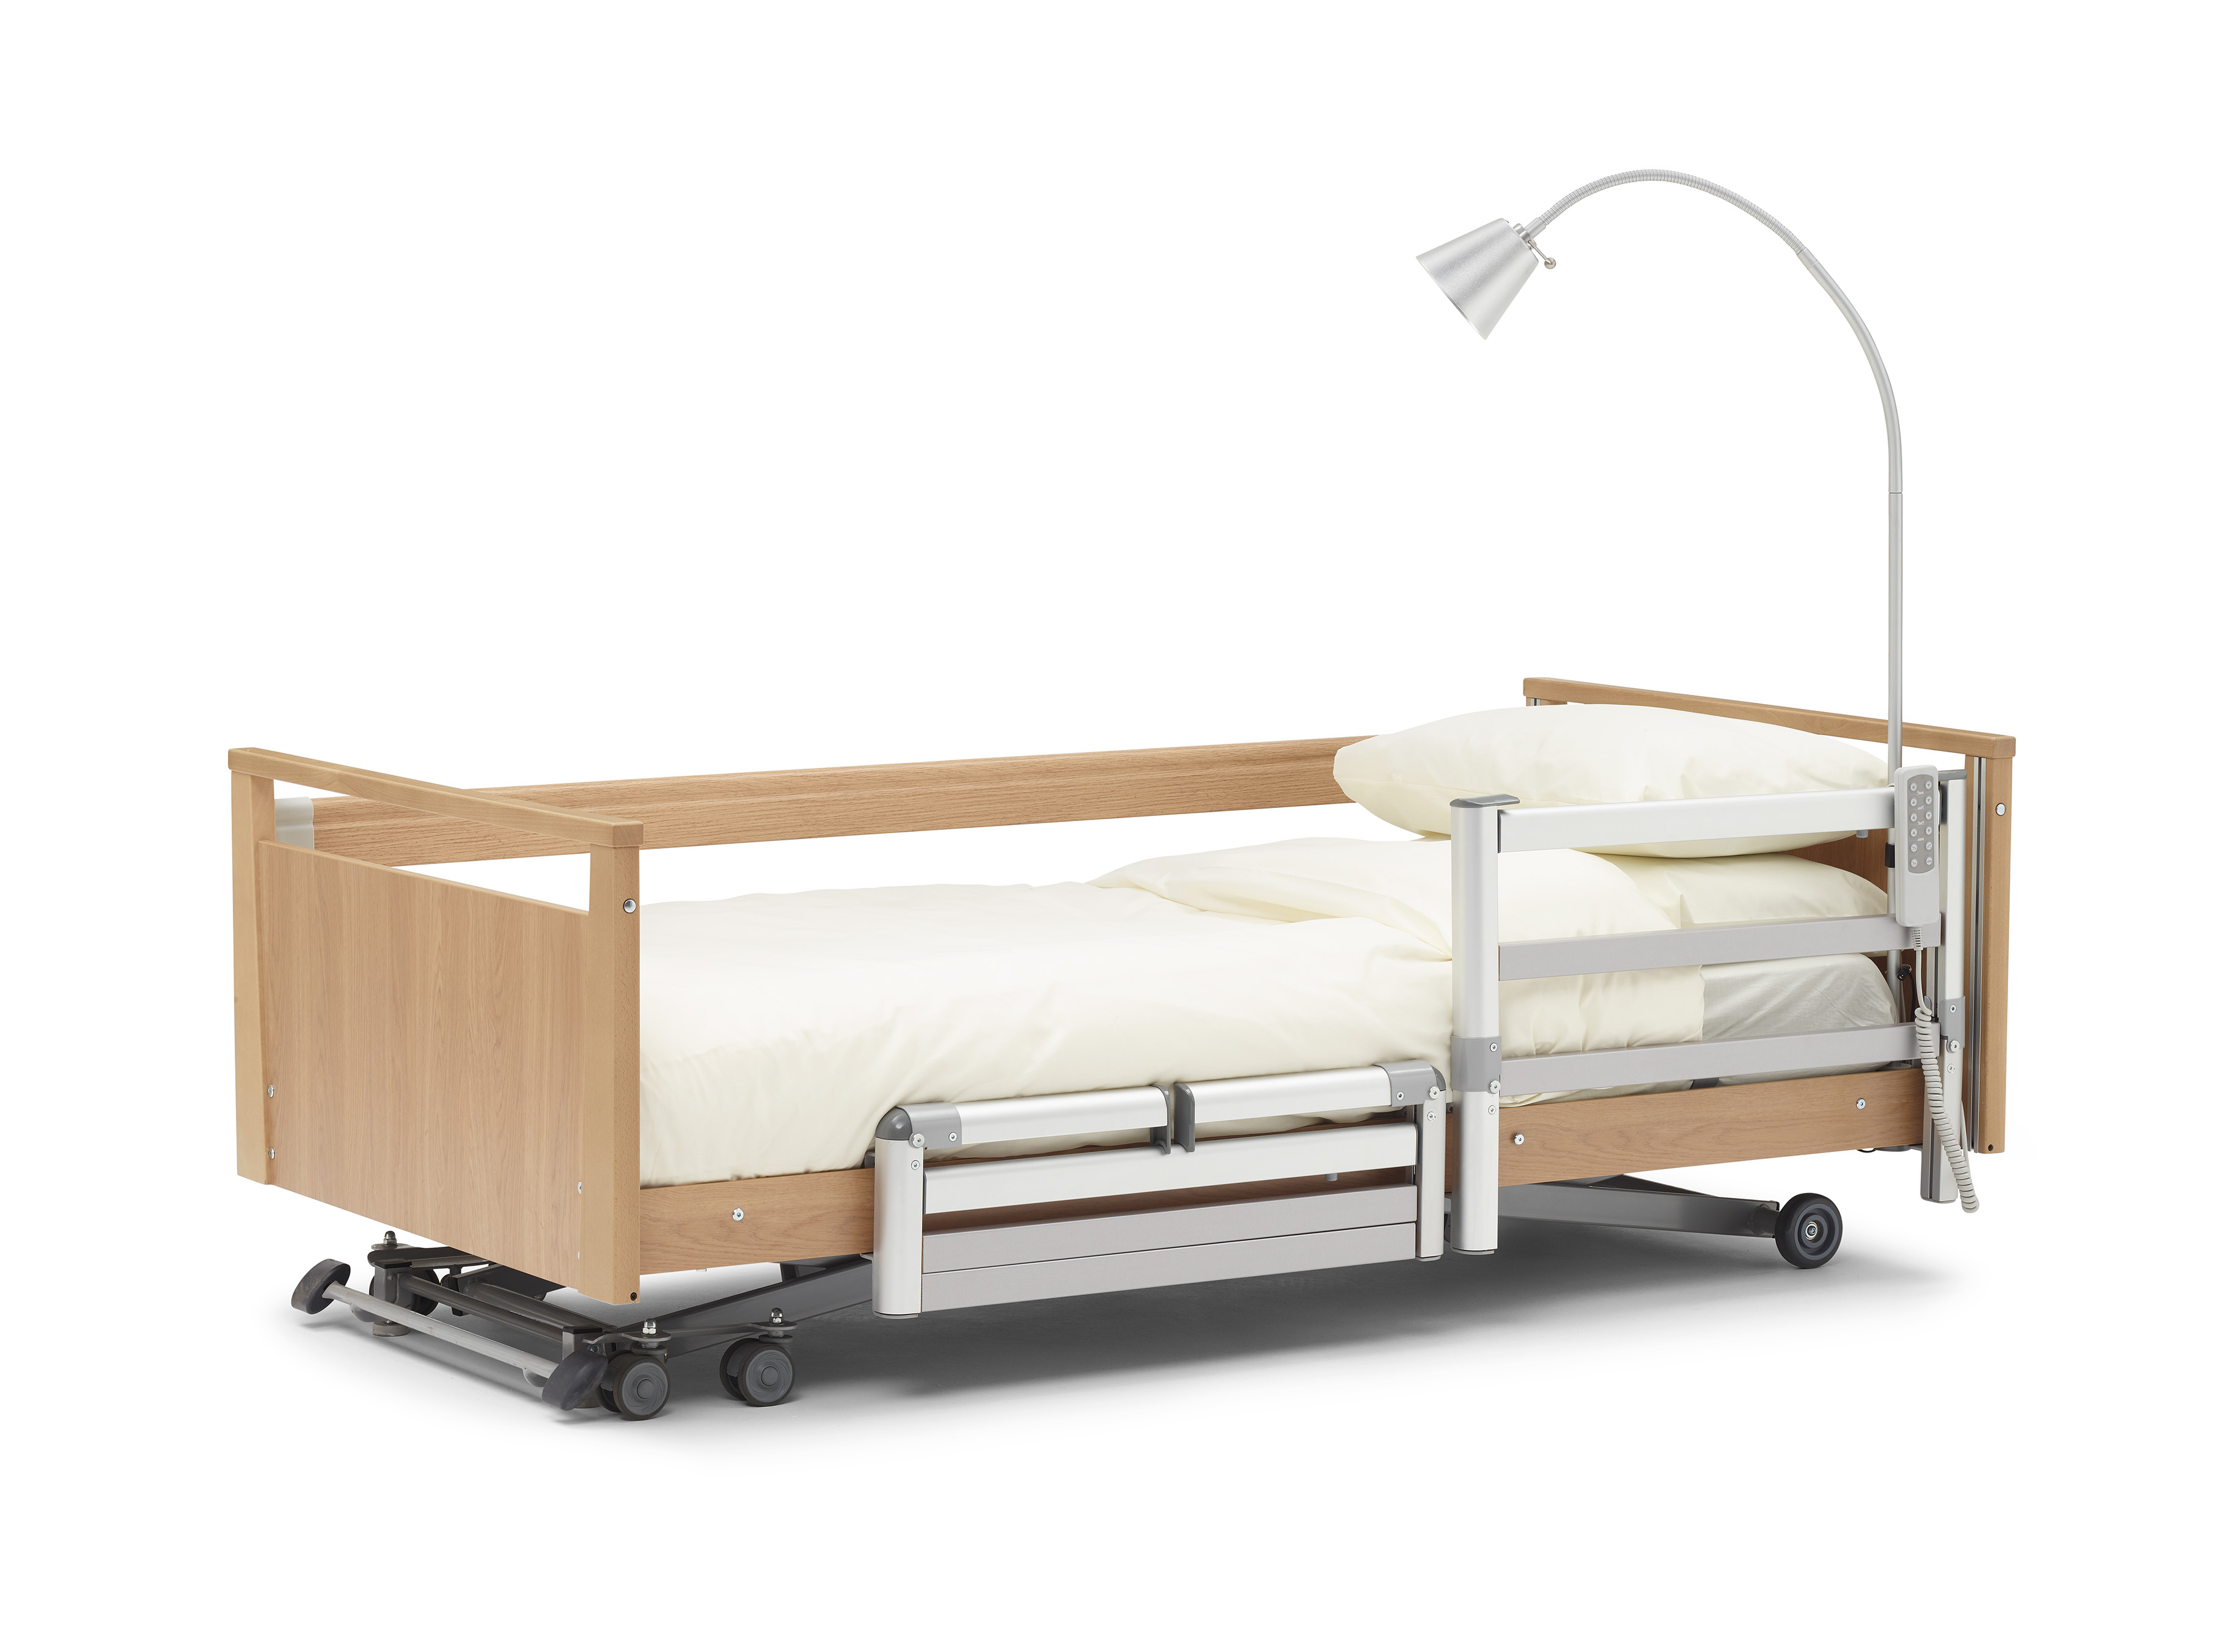 Impress 3 bed c/w Contemporary head/foot boards, side skirts and side rails
Finish: Light Sorano Oak